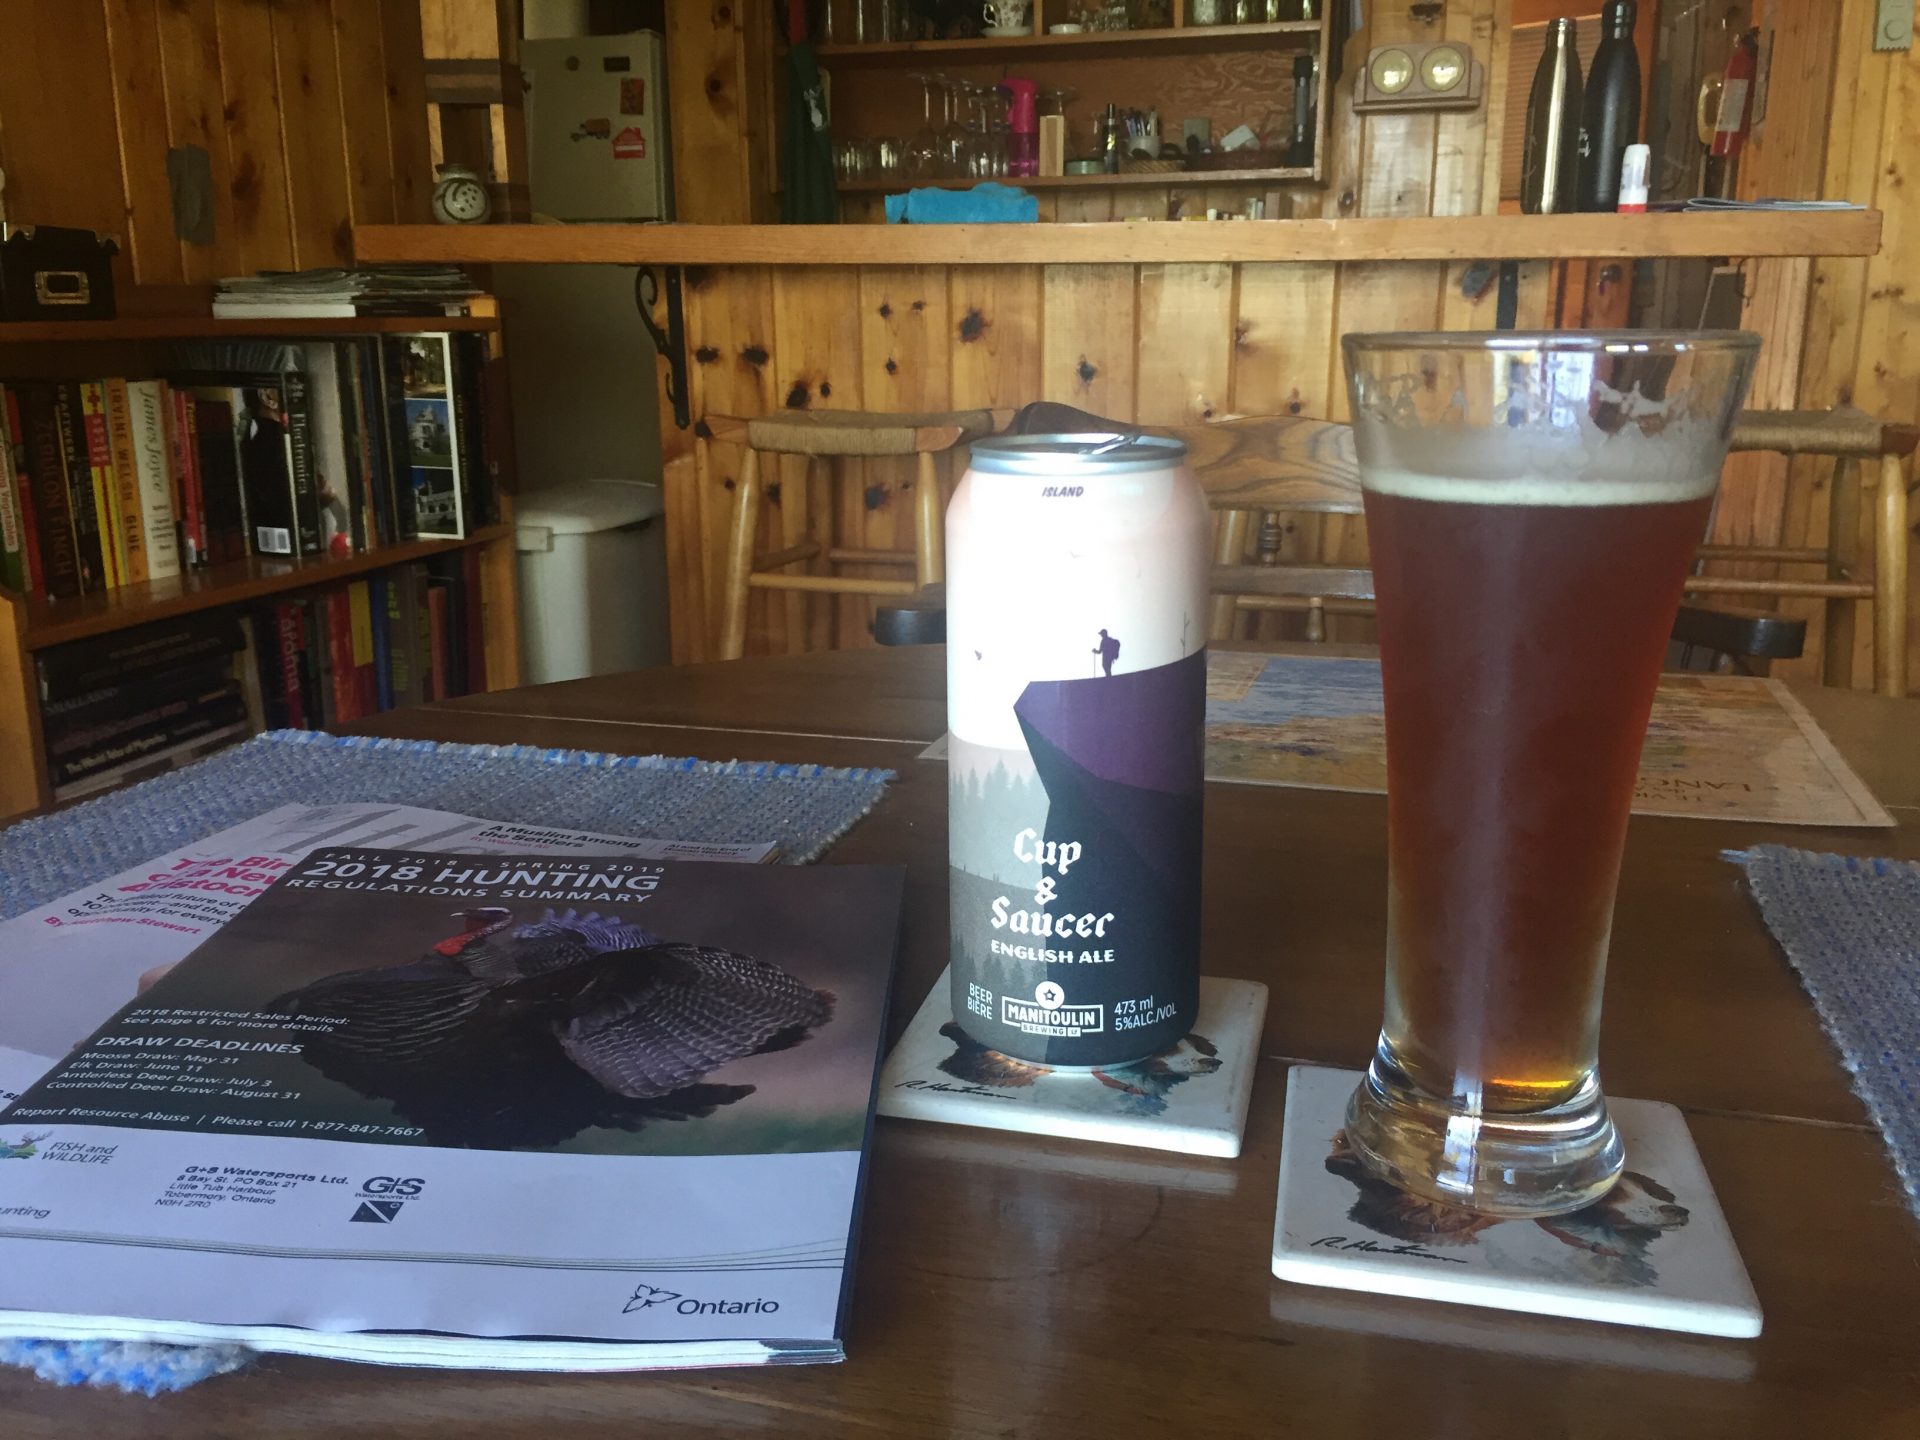 Try This : Manitoulin Brewing Co.’s Cup And Saucer English Ale